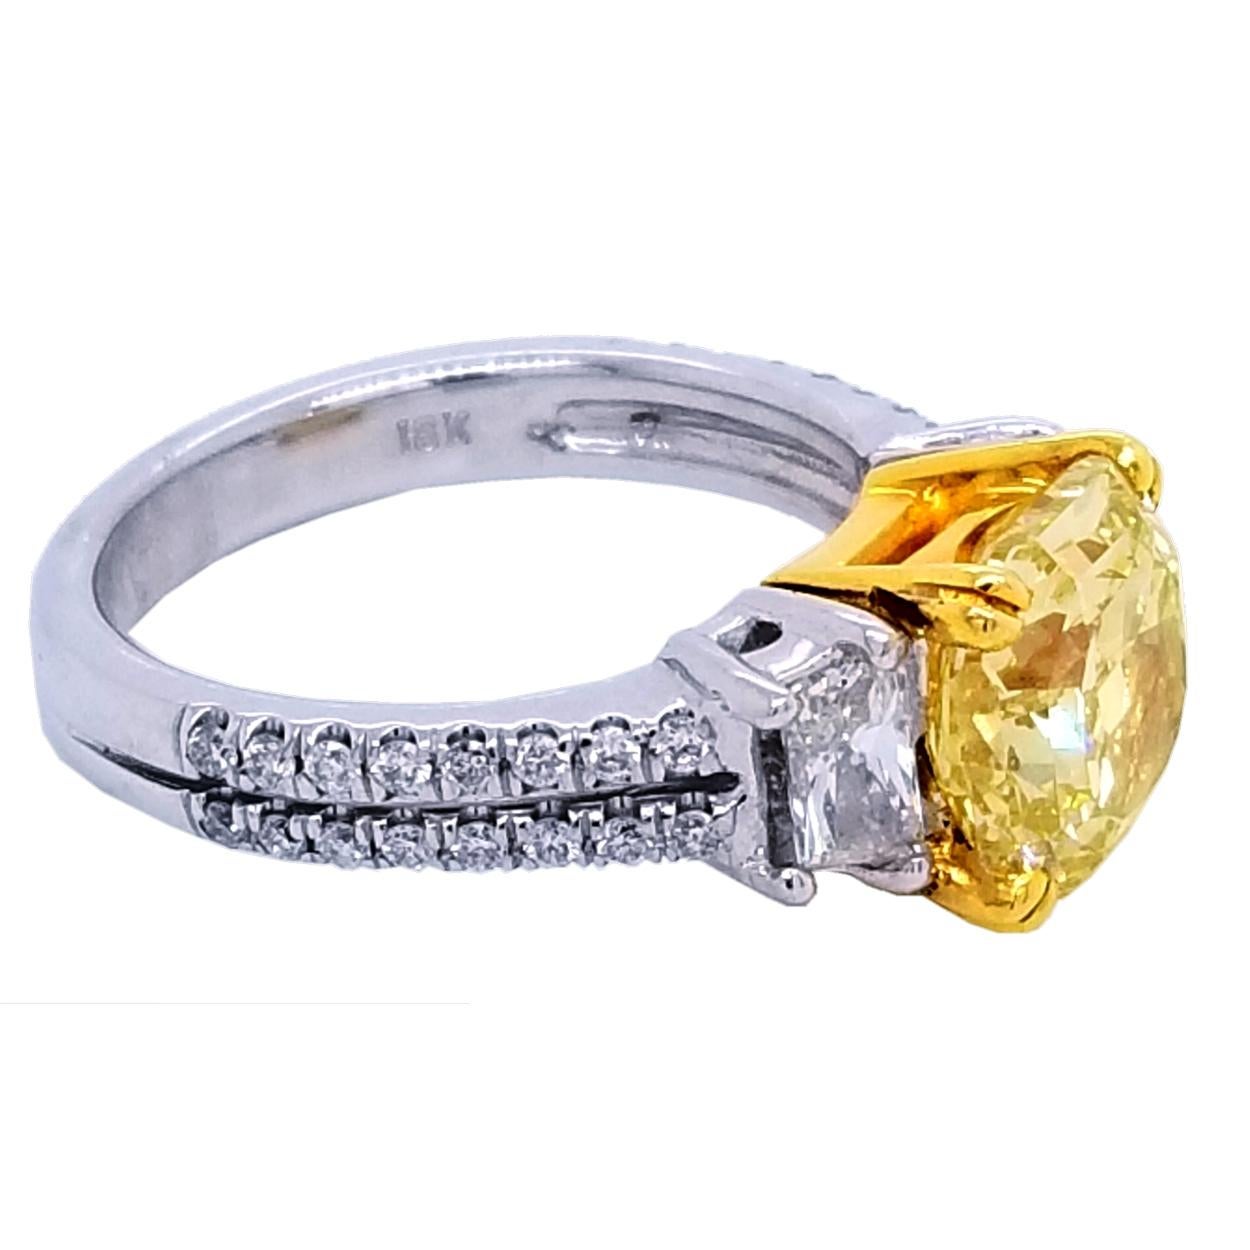 A very fine Radiant Cut Natural Fancy Intense Yellow SI2 GIA certified center Diamond set in a fine 18K gold pave set Ring with 2 Trapezoid diamonds on the side with total weight of 0.8 Ct. #sayitwithyellow #canarydiamond.

Diamond specs:
Center